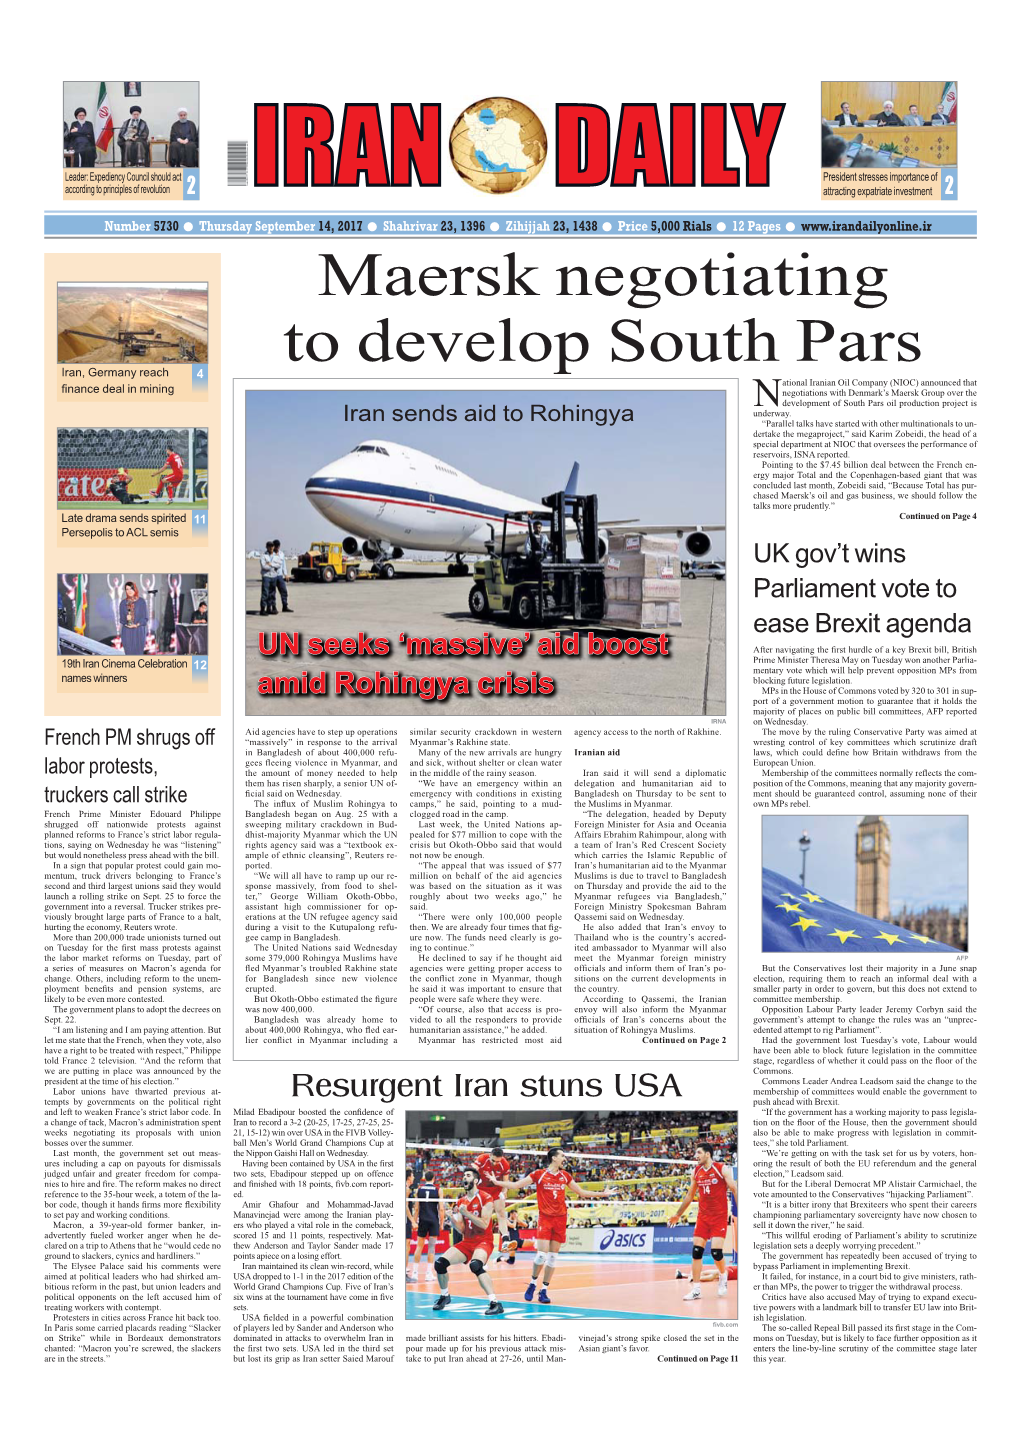 Maersk Negotiating to Develop South Pars